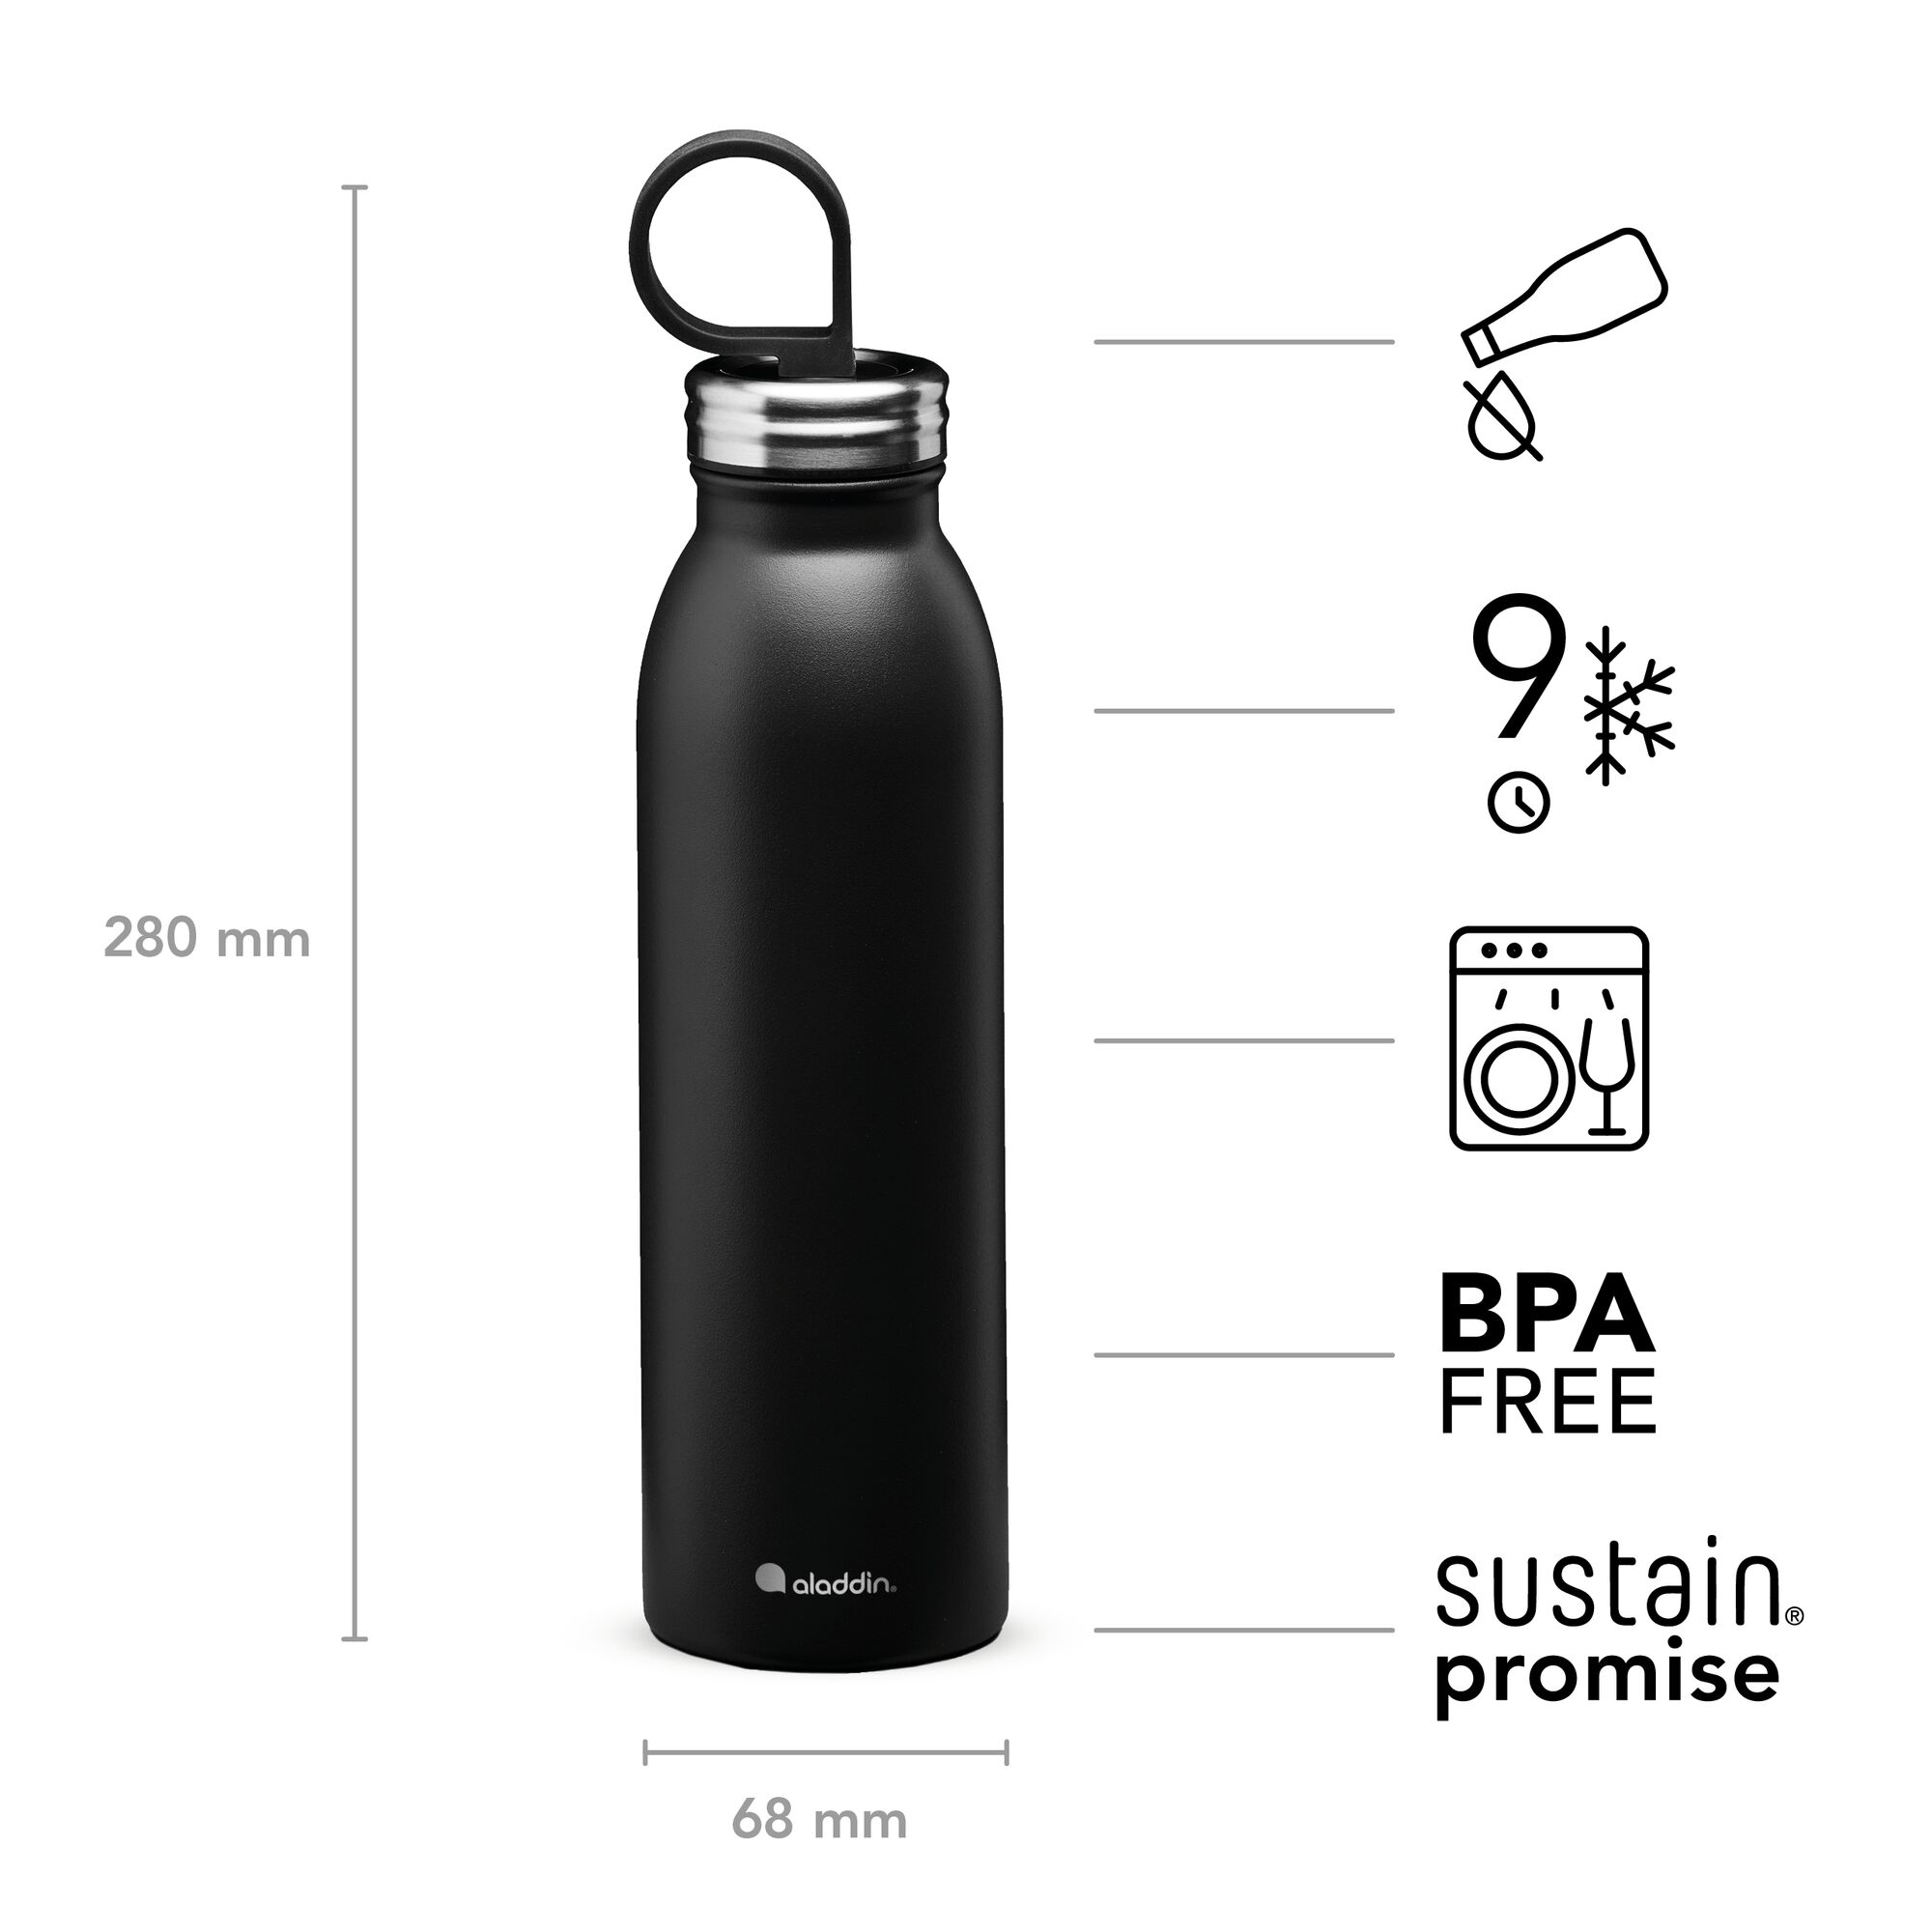 ALADDIN CHILLED THERMAVAC WATER BOTTLE NAVY BLACK 550ML 9 HRS COLD